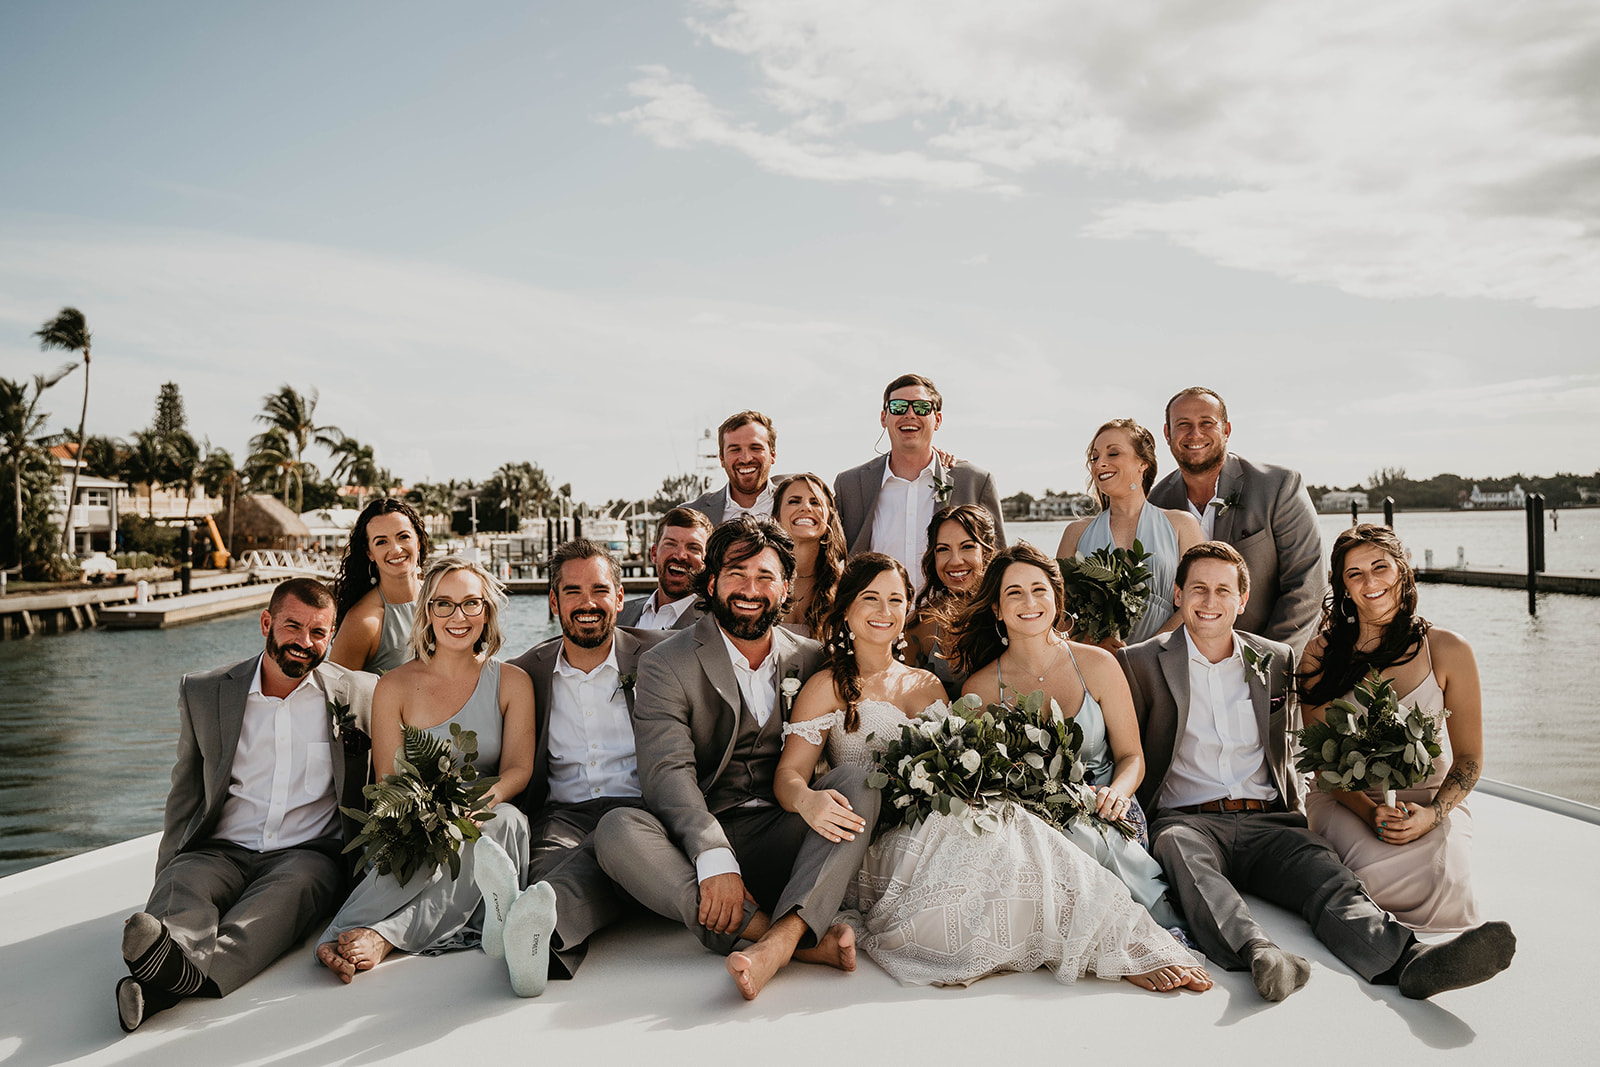 Waterfront Boat Bridal Party Wedding Portraits